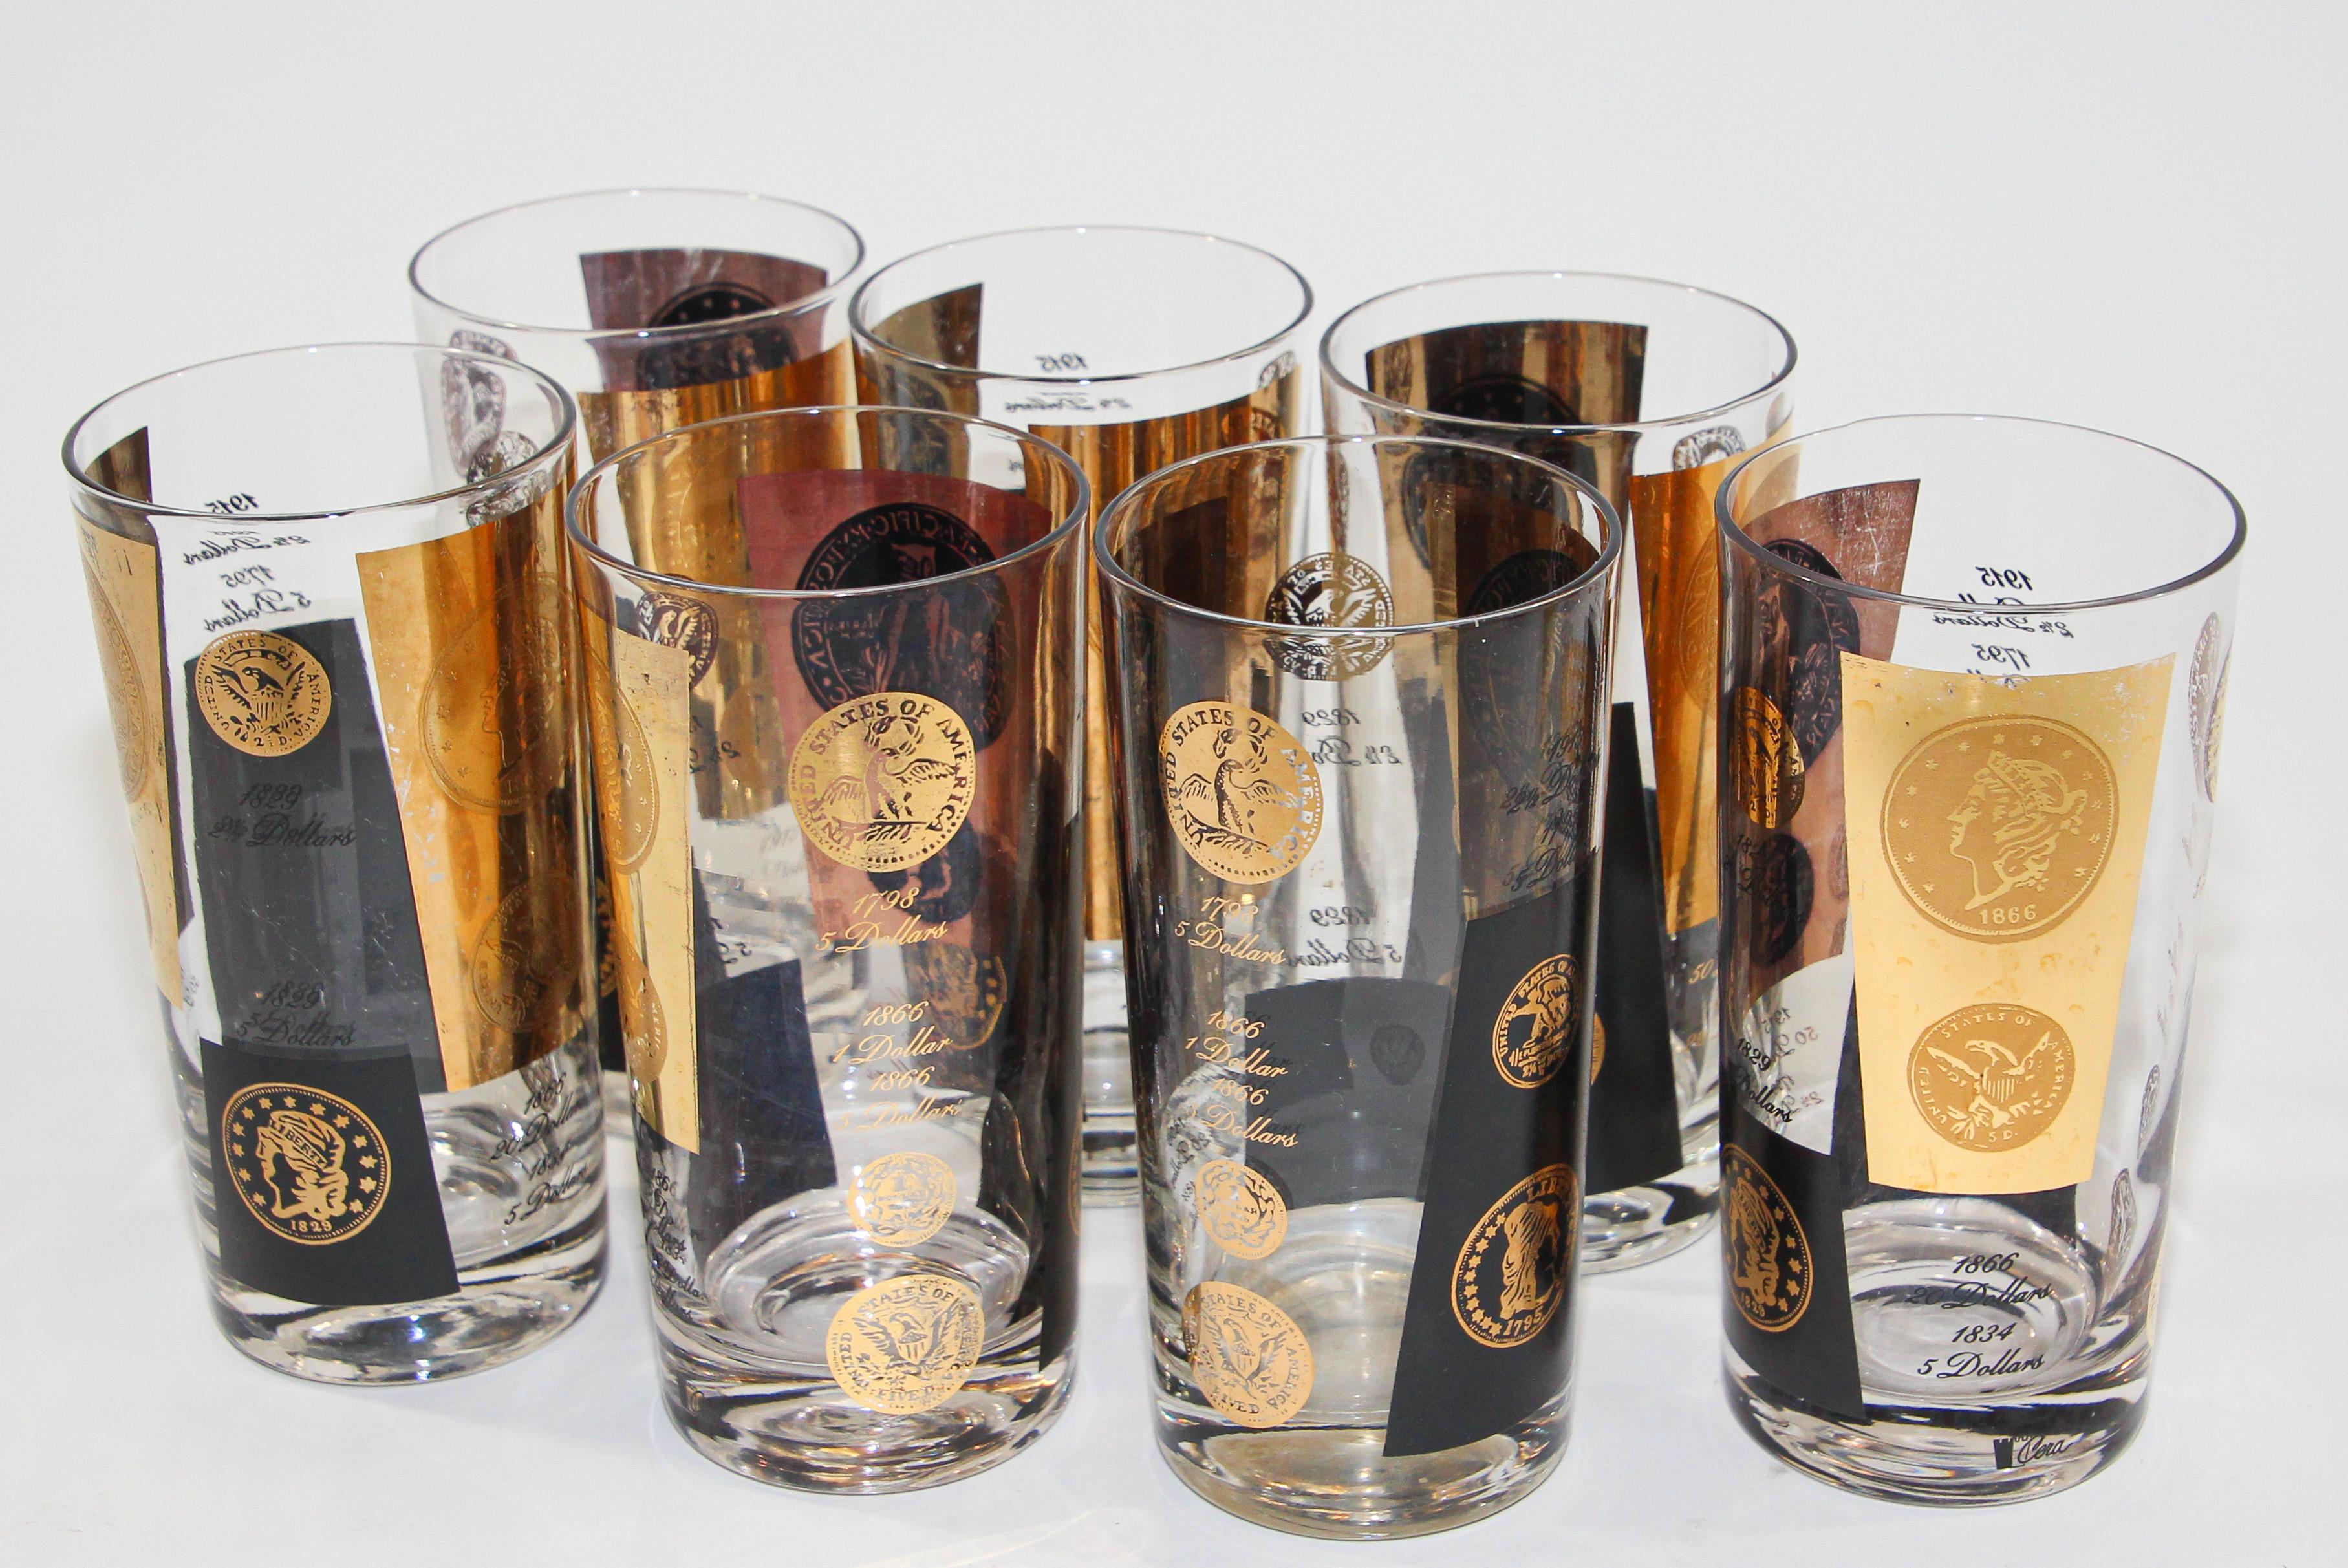 Midcentury vintage Set of 7 pieces 5-ounce rocks glasses 1960s gold printed presidential coins.
Cera 22-karat gold signed glassware barware.
Gold and black coin design.
The glasses feature 